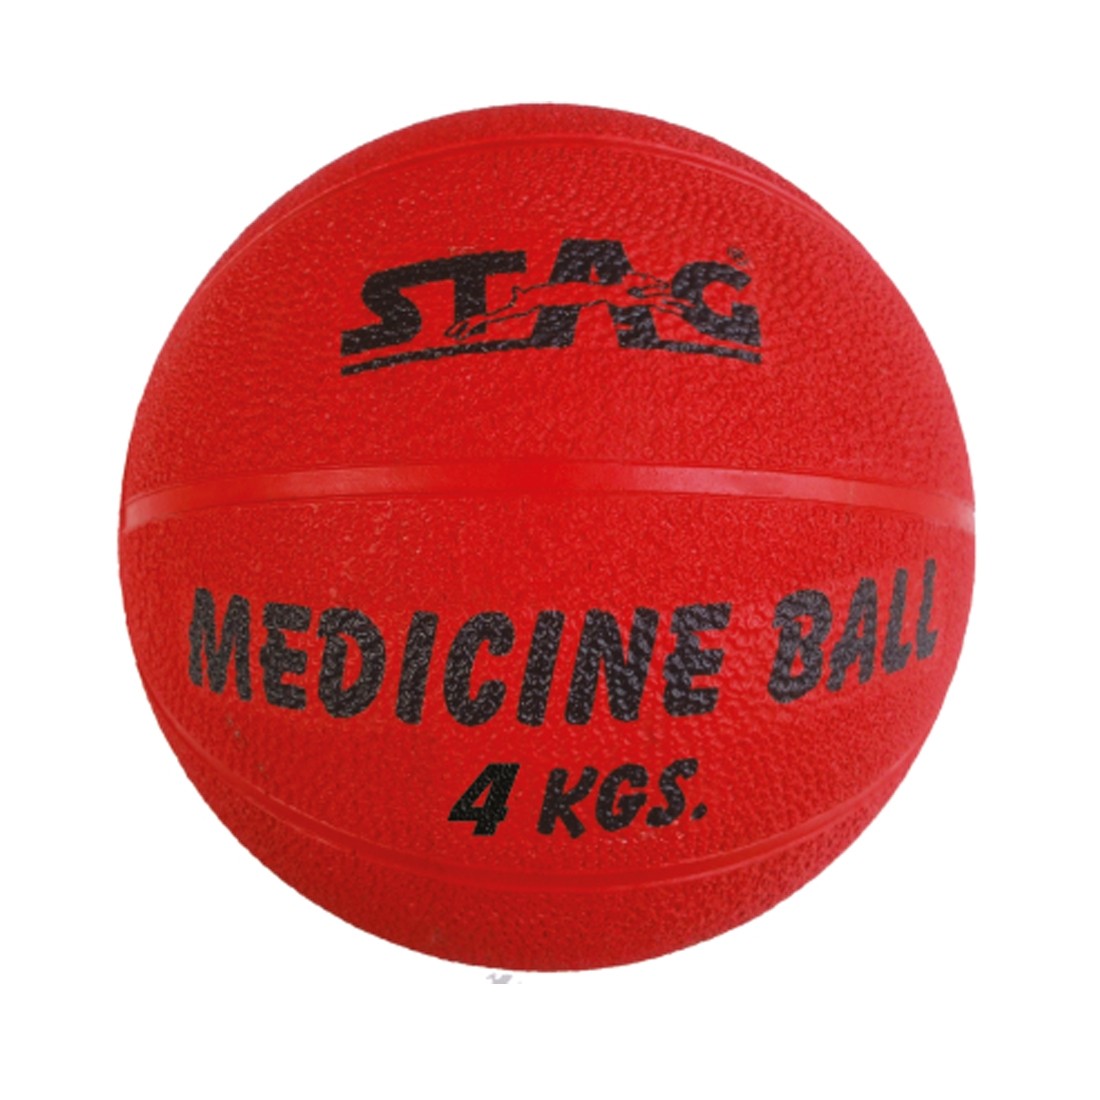 STAG MEDICINE BOUNCING GYM BALL RUBBER INFLATABLE 3KG